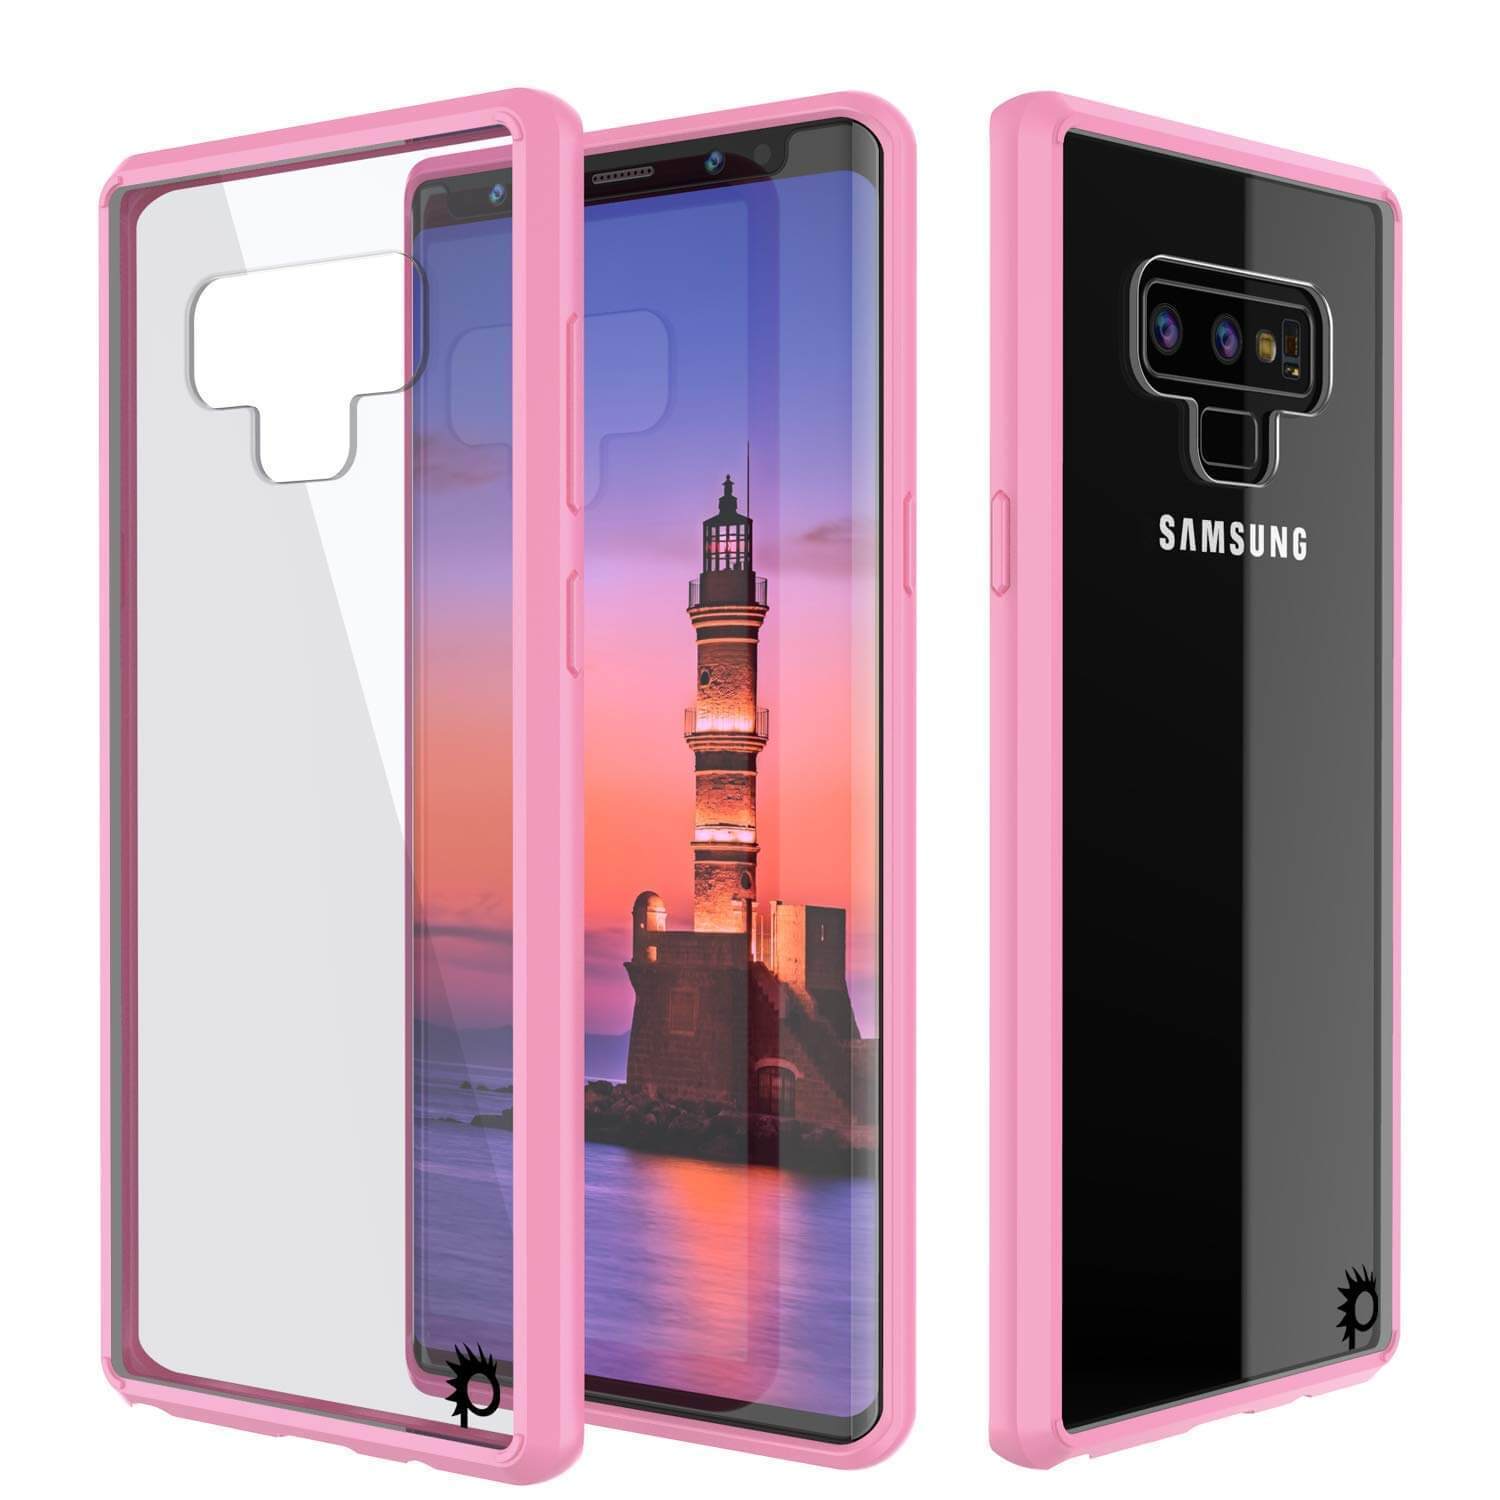 Galaxy Note 10+ Plus Punkcase Lucid-2.0 Series Slim Fit Armor Pink Case Cover